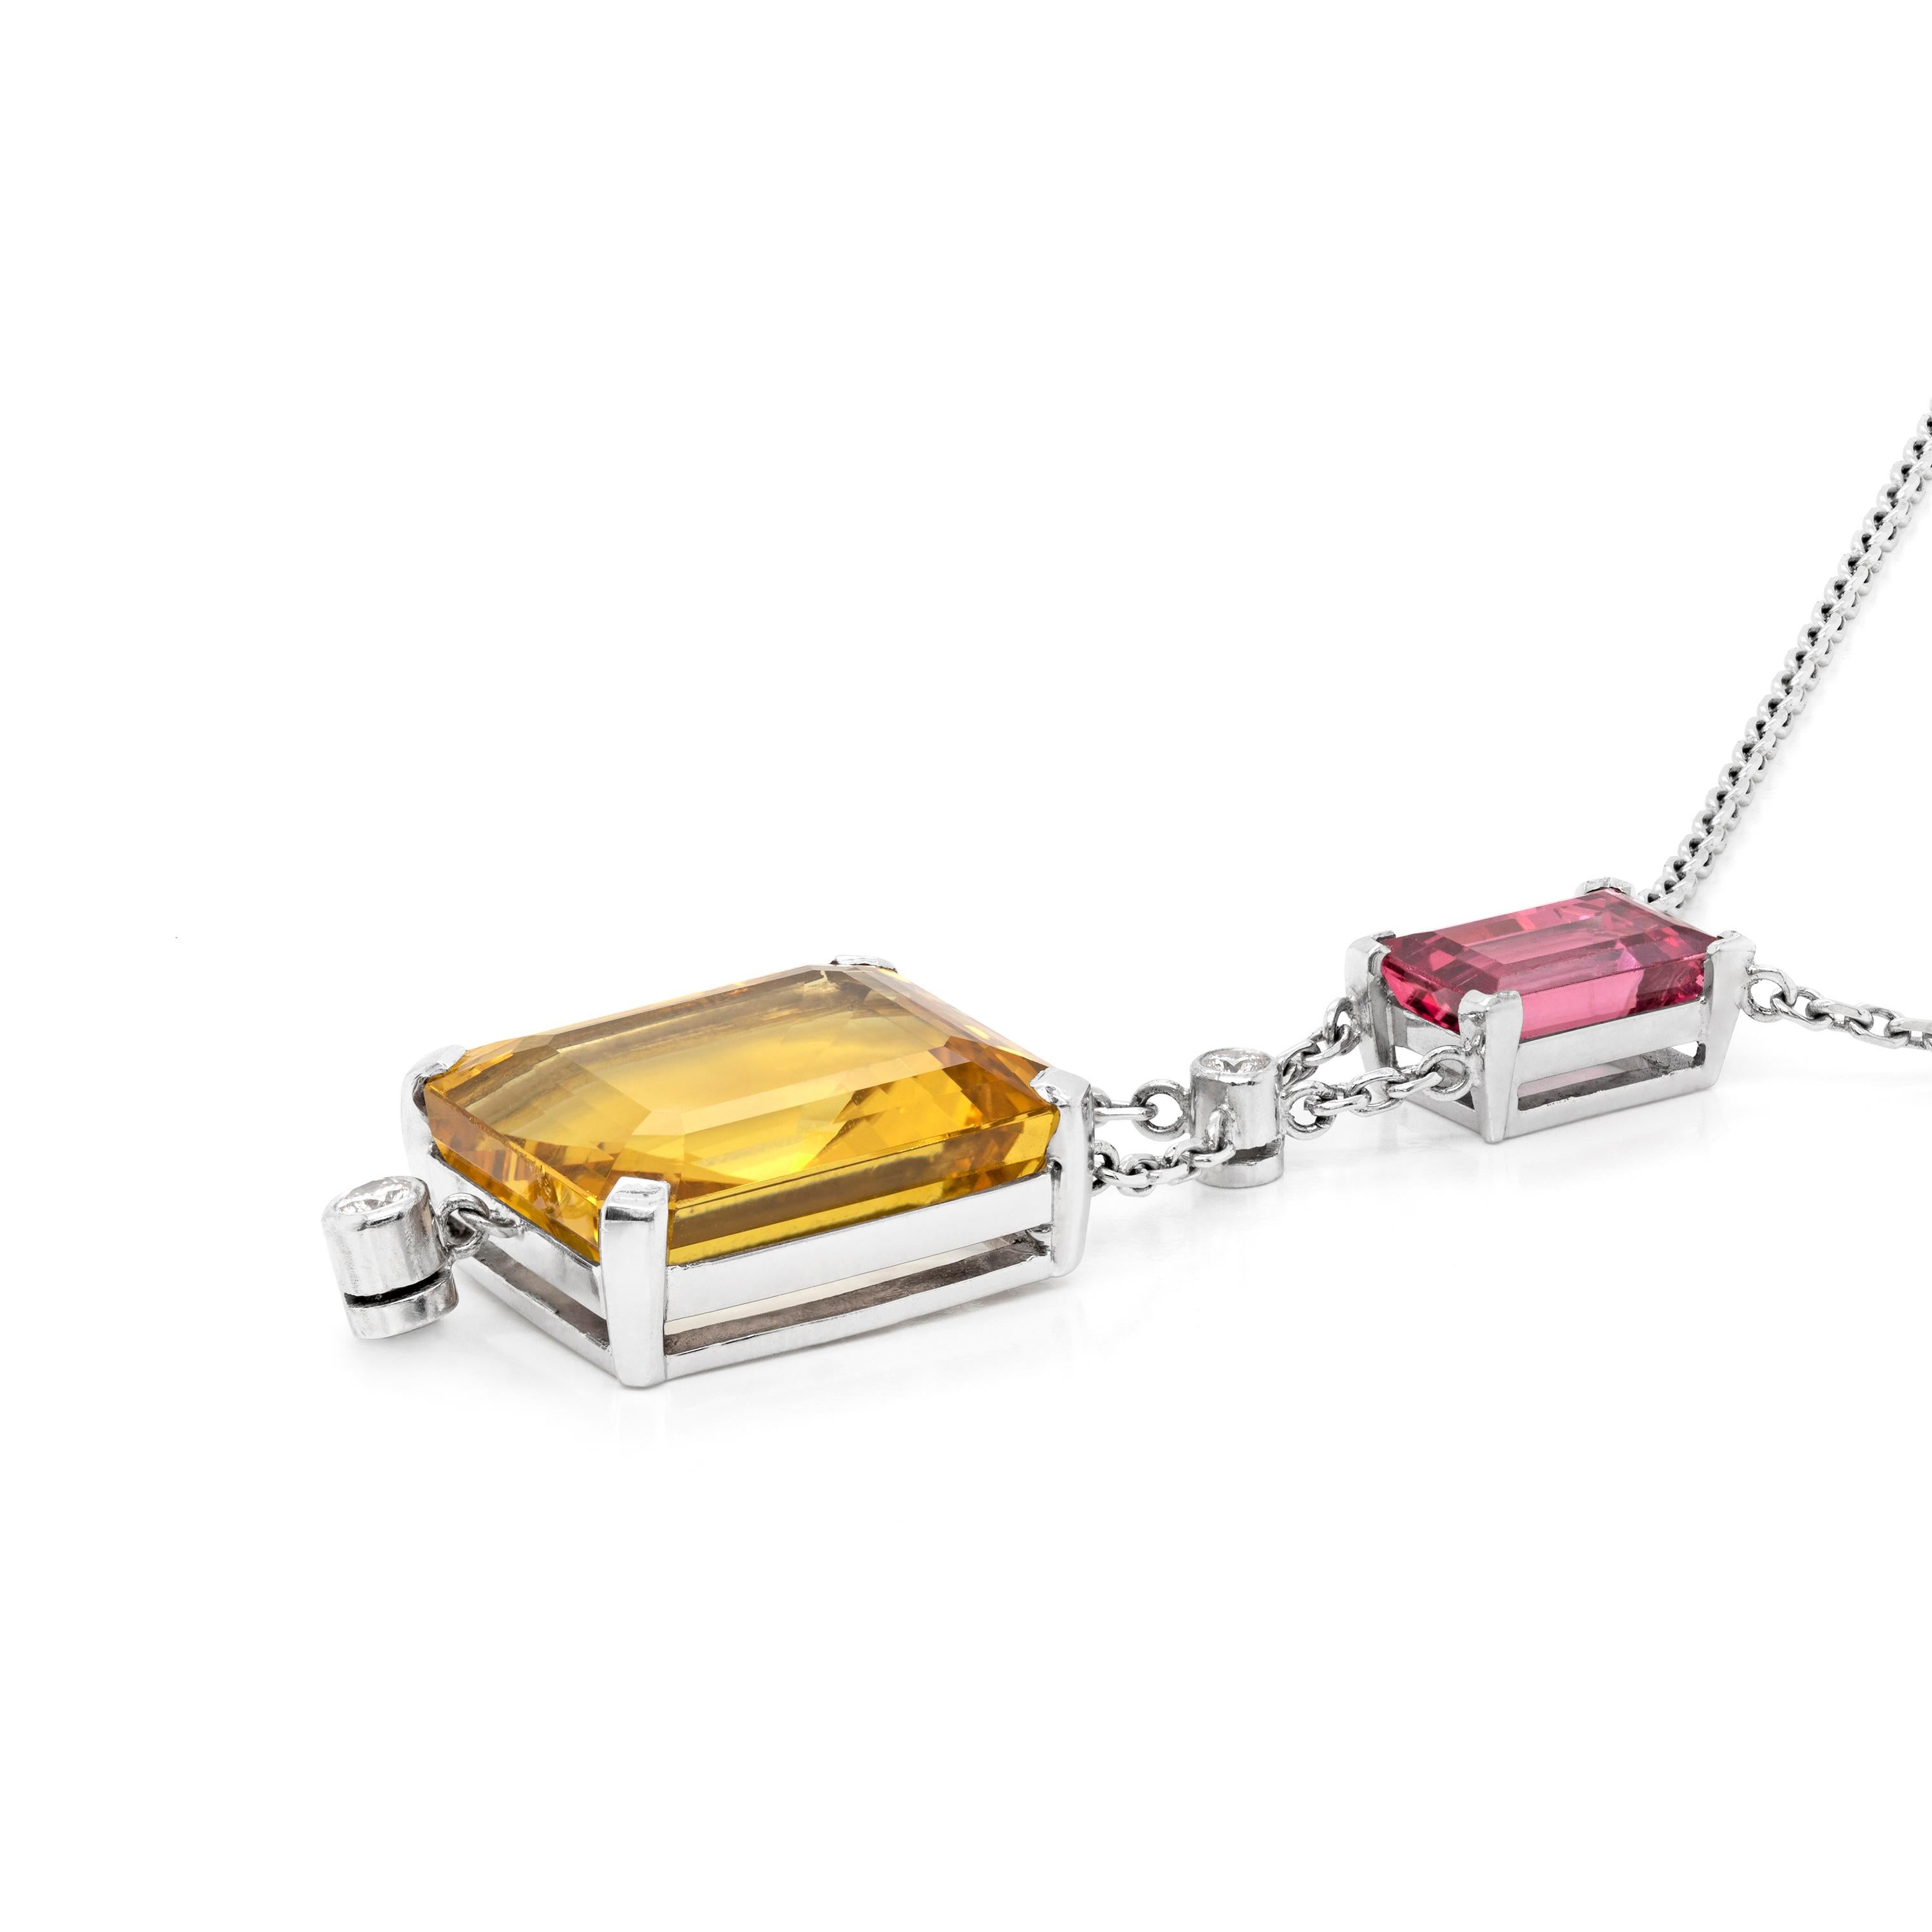 This stunning drop pendant necklace features an emerald cut pink spinel weighing 3.40ct set in a four claw, open back setting. Hanging below suspends a rubover set round brilliant cut diamond weighing 0.07ct holding an impressive 16.78ct emerald cut